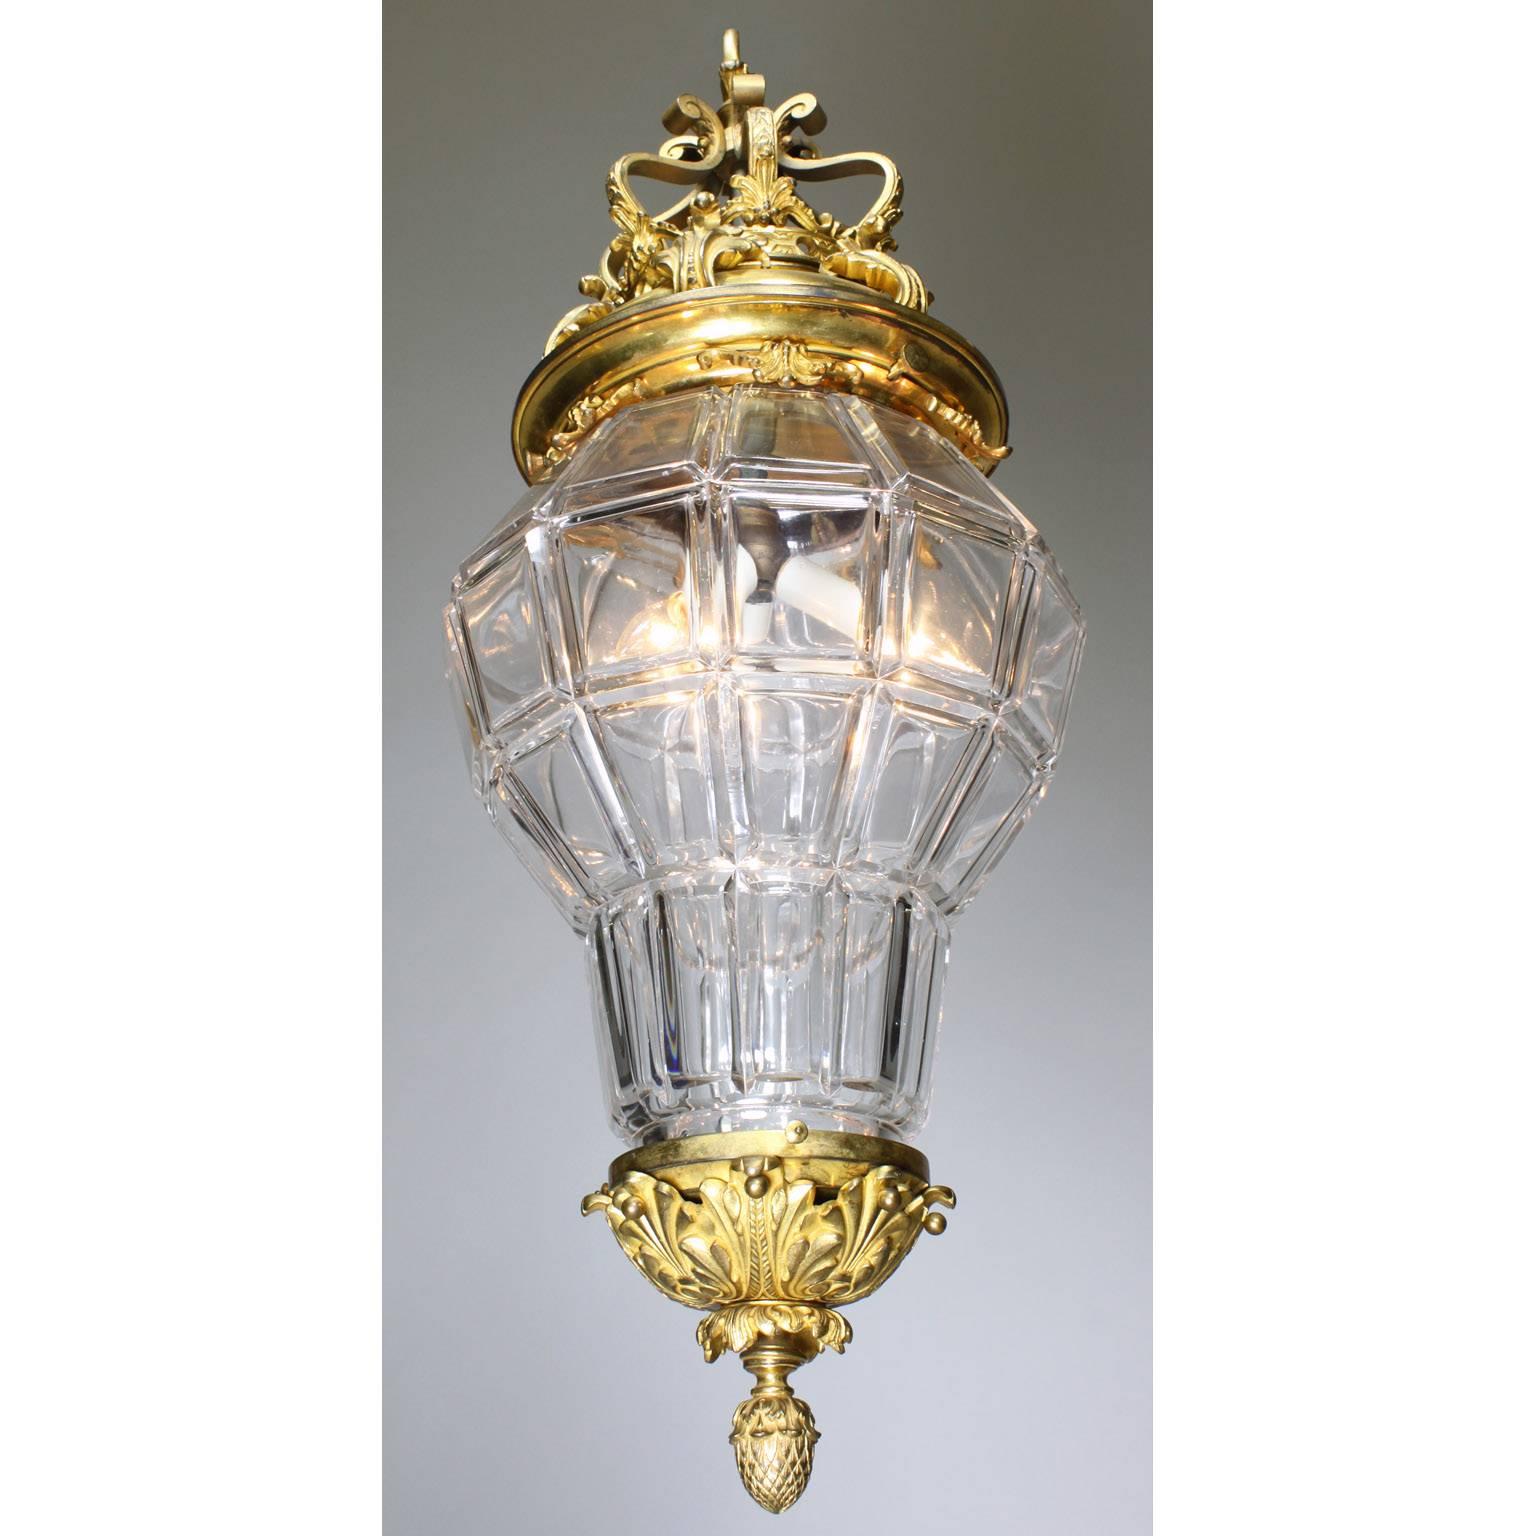 A fine French 19-20th century gilt-bronze and molded cut-glass 